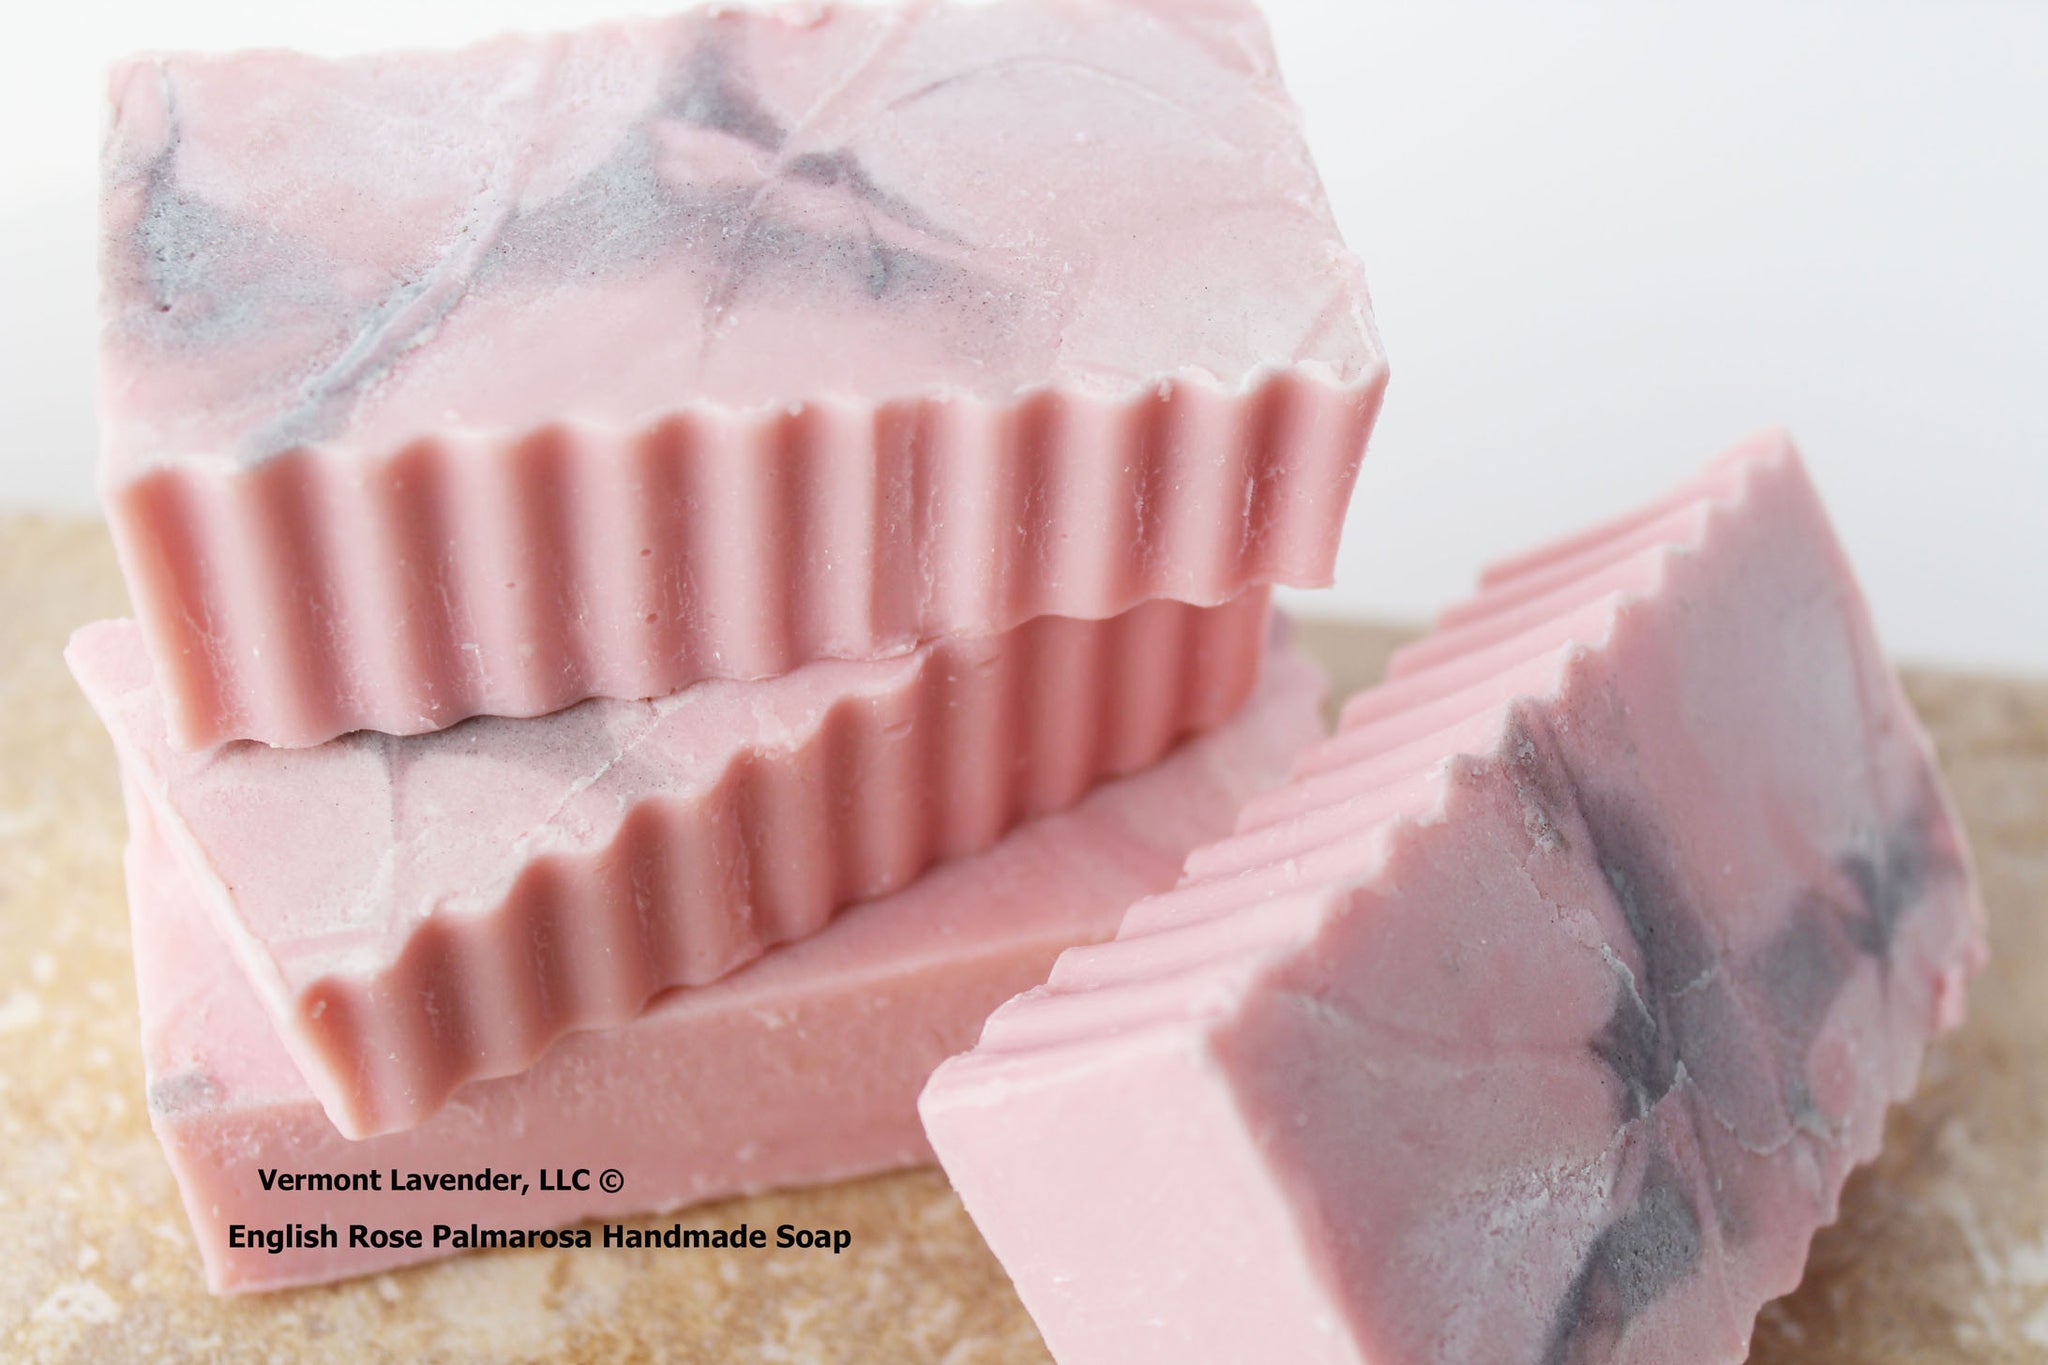 English palmarosa Vermont Lavender soap has a beautiful rose scented soap made locally here in Barre, Vermont.